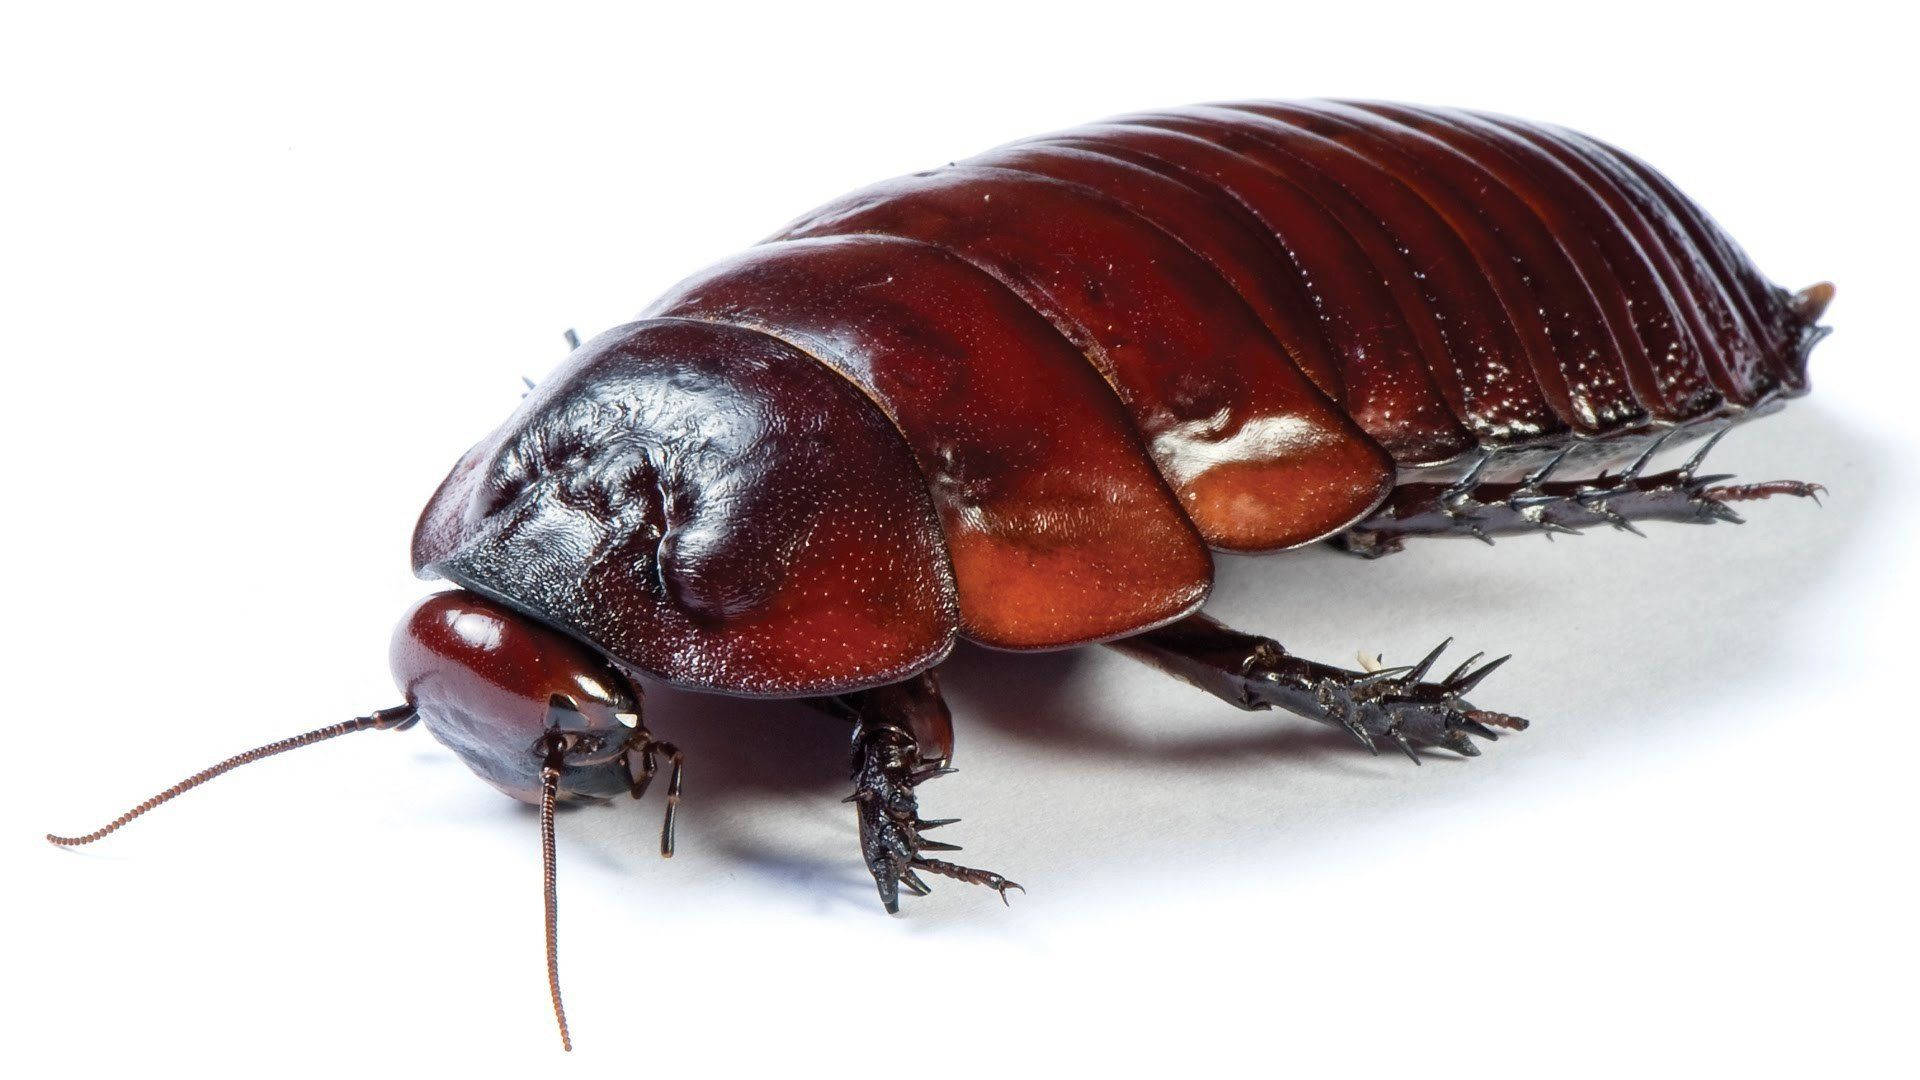 Top 999+ Cockroach Wallpapers Full HD, 4K✅Free to Use